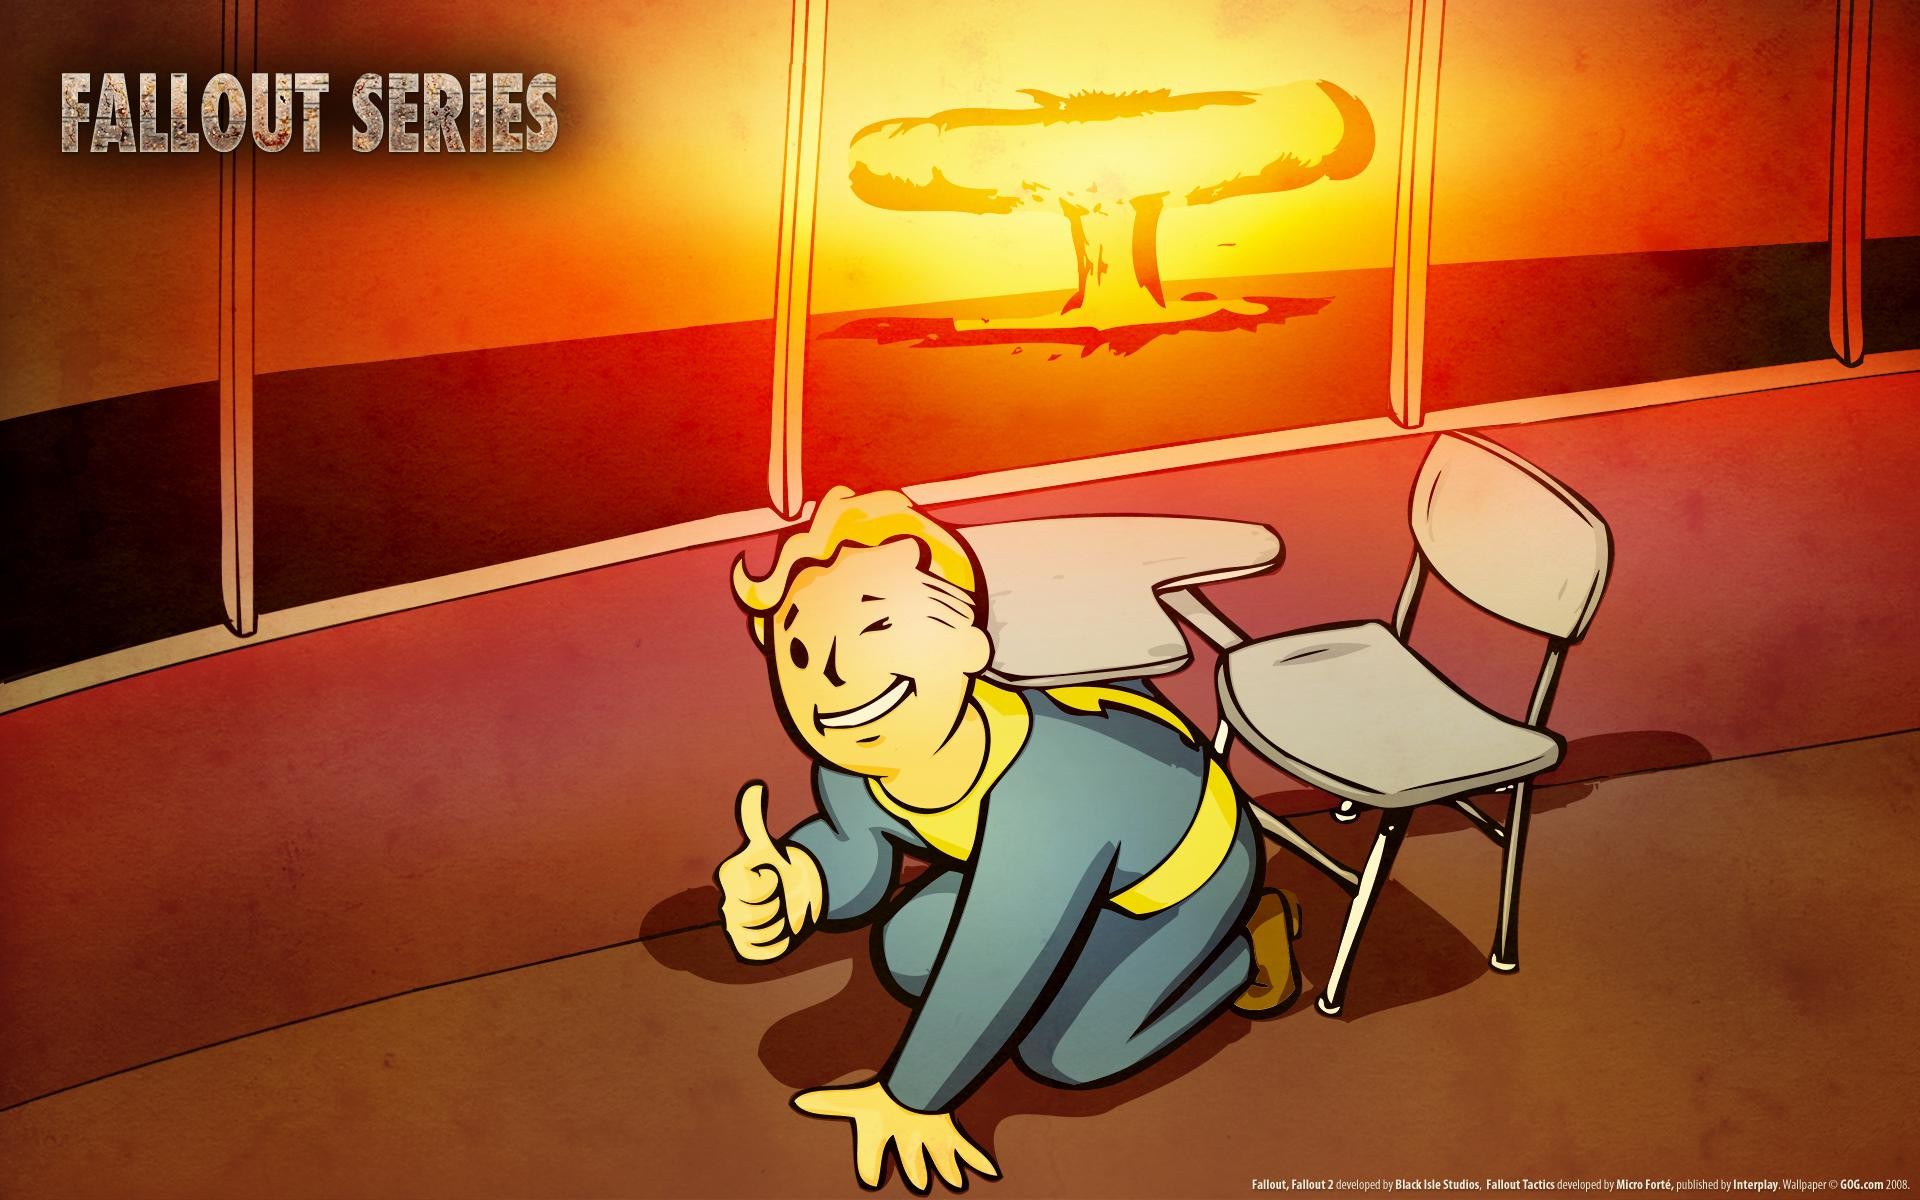 General 1920x1200 Fallout Fallout: New Vegas Vault Boy video games Pip-Boy Bethesda Softworks video game characters